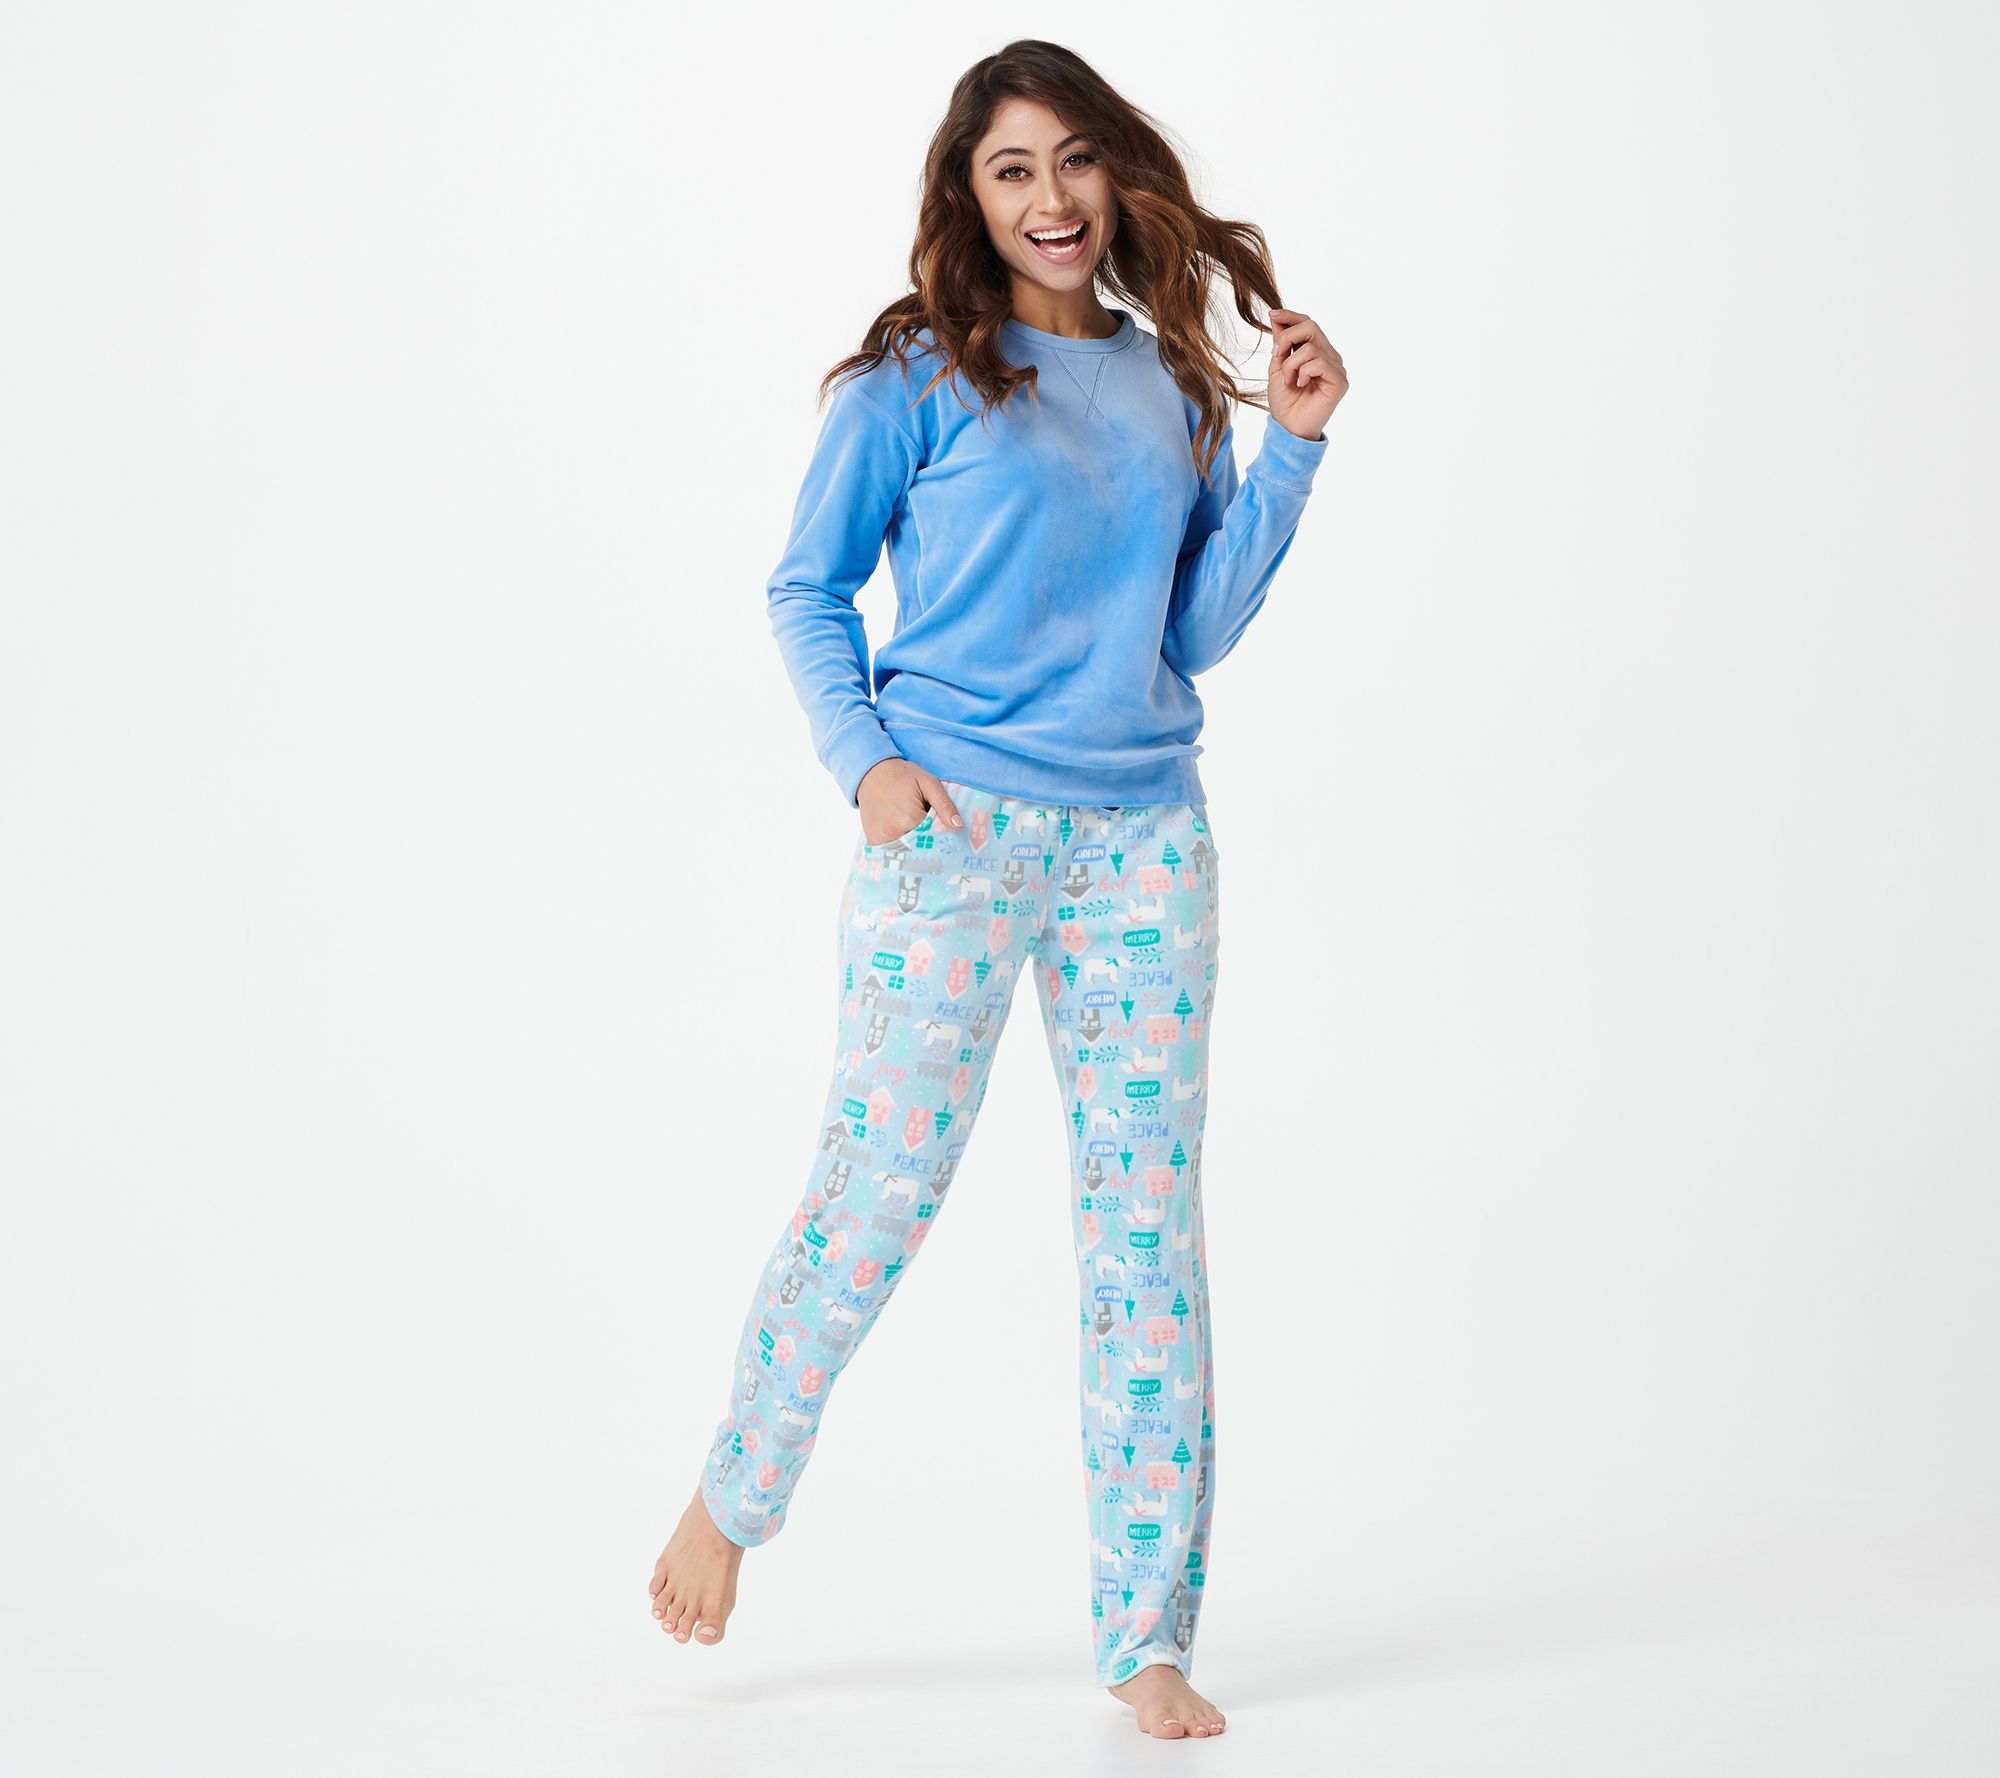 Velvet Lace Trim Snowflake Pajama Set For Women Perfect For Autumn And  Winter Lounging And Home Comfort From Tales01, $21.26